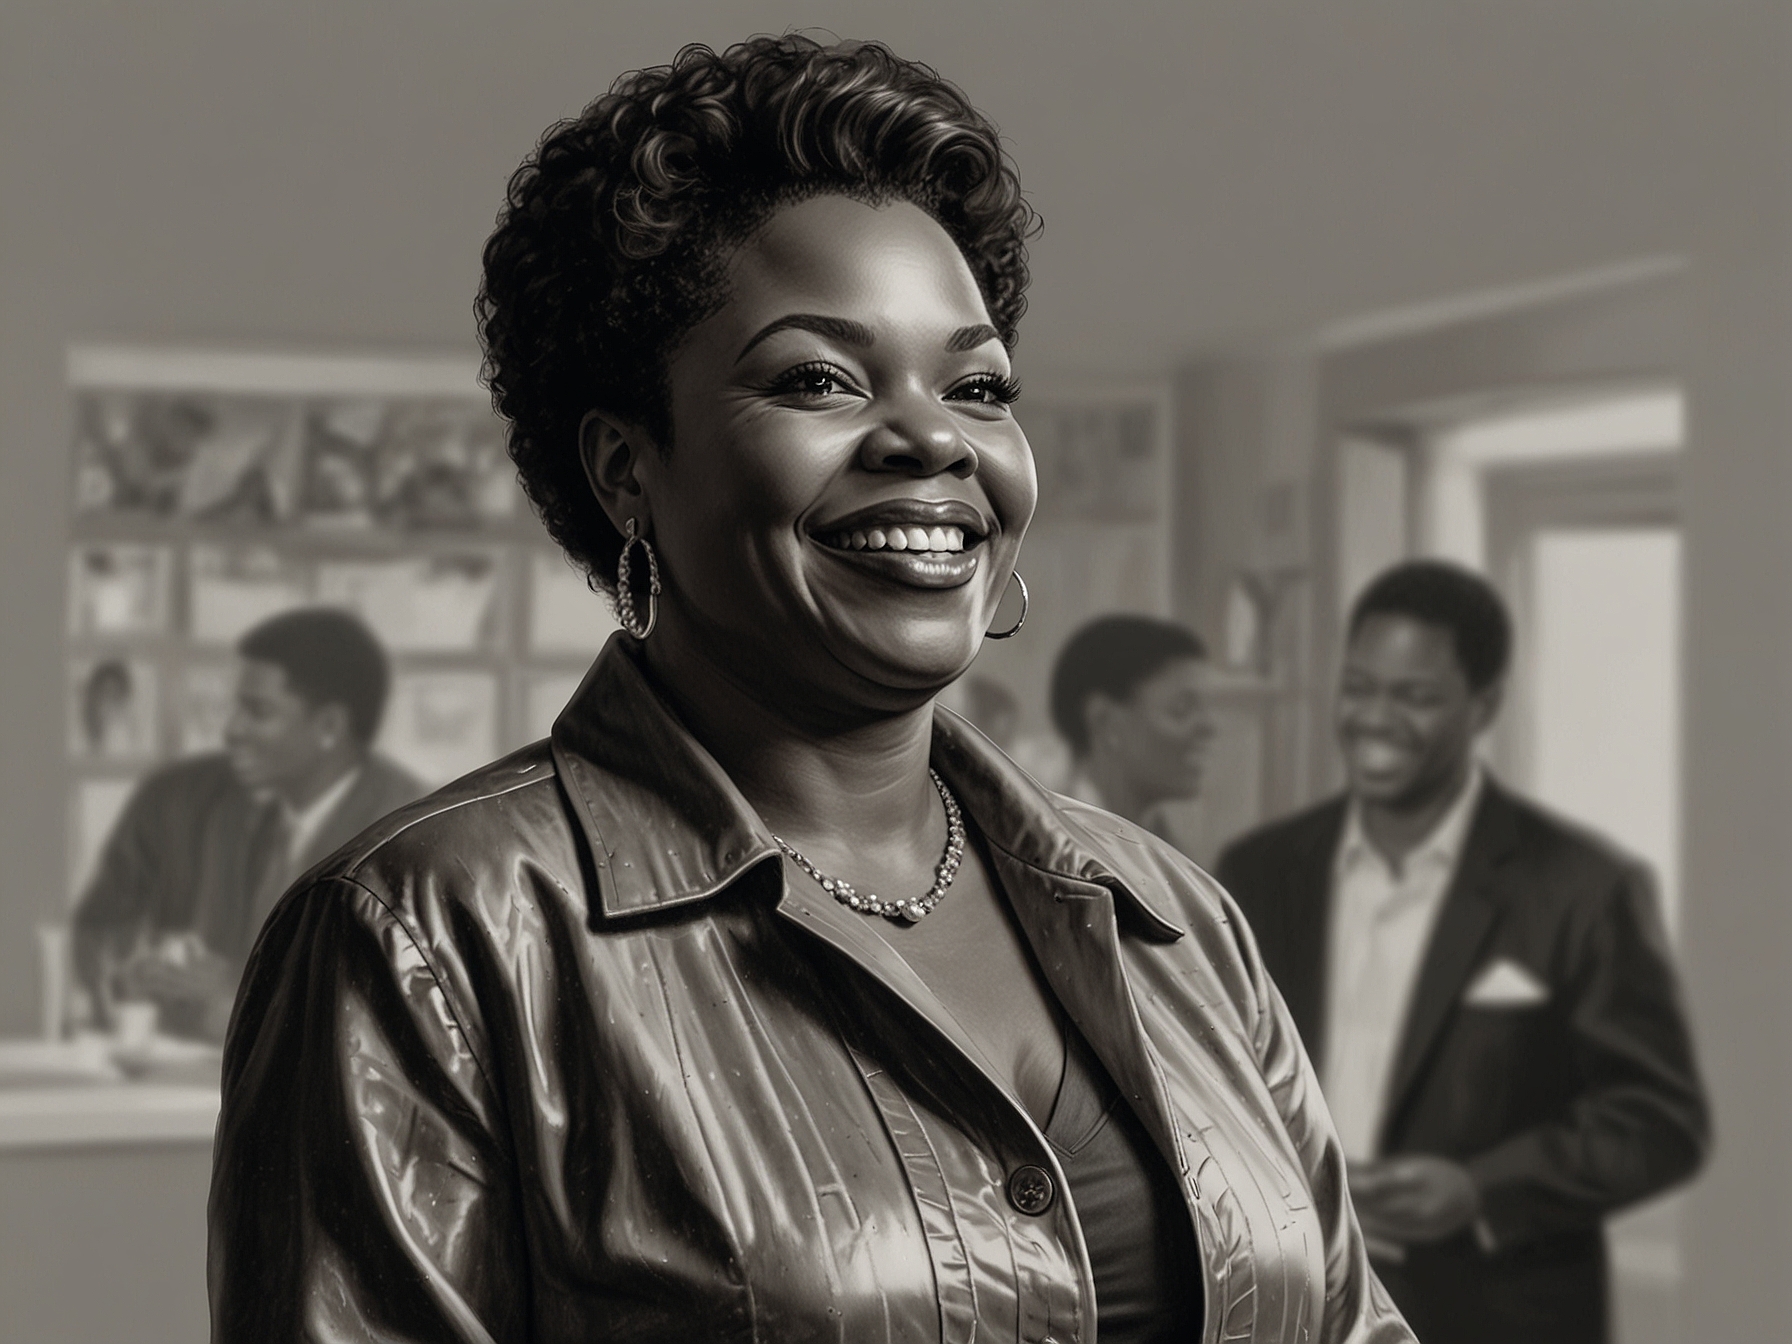 Brenda Edwards engaged in a charitable event, interacting warmly with community members. Her involvement in such causes showcases the fulfilling and busy life she leads without a romantic partner.